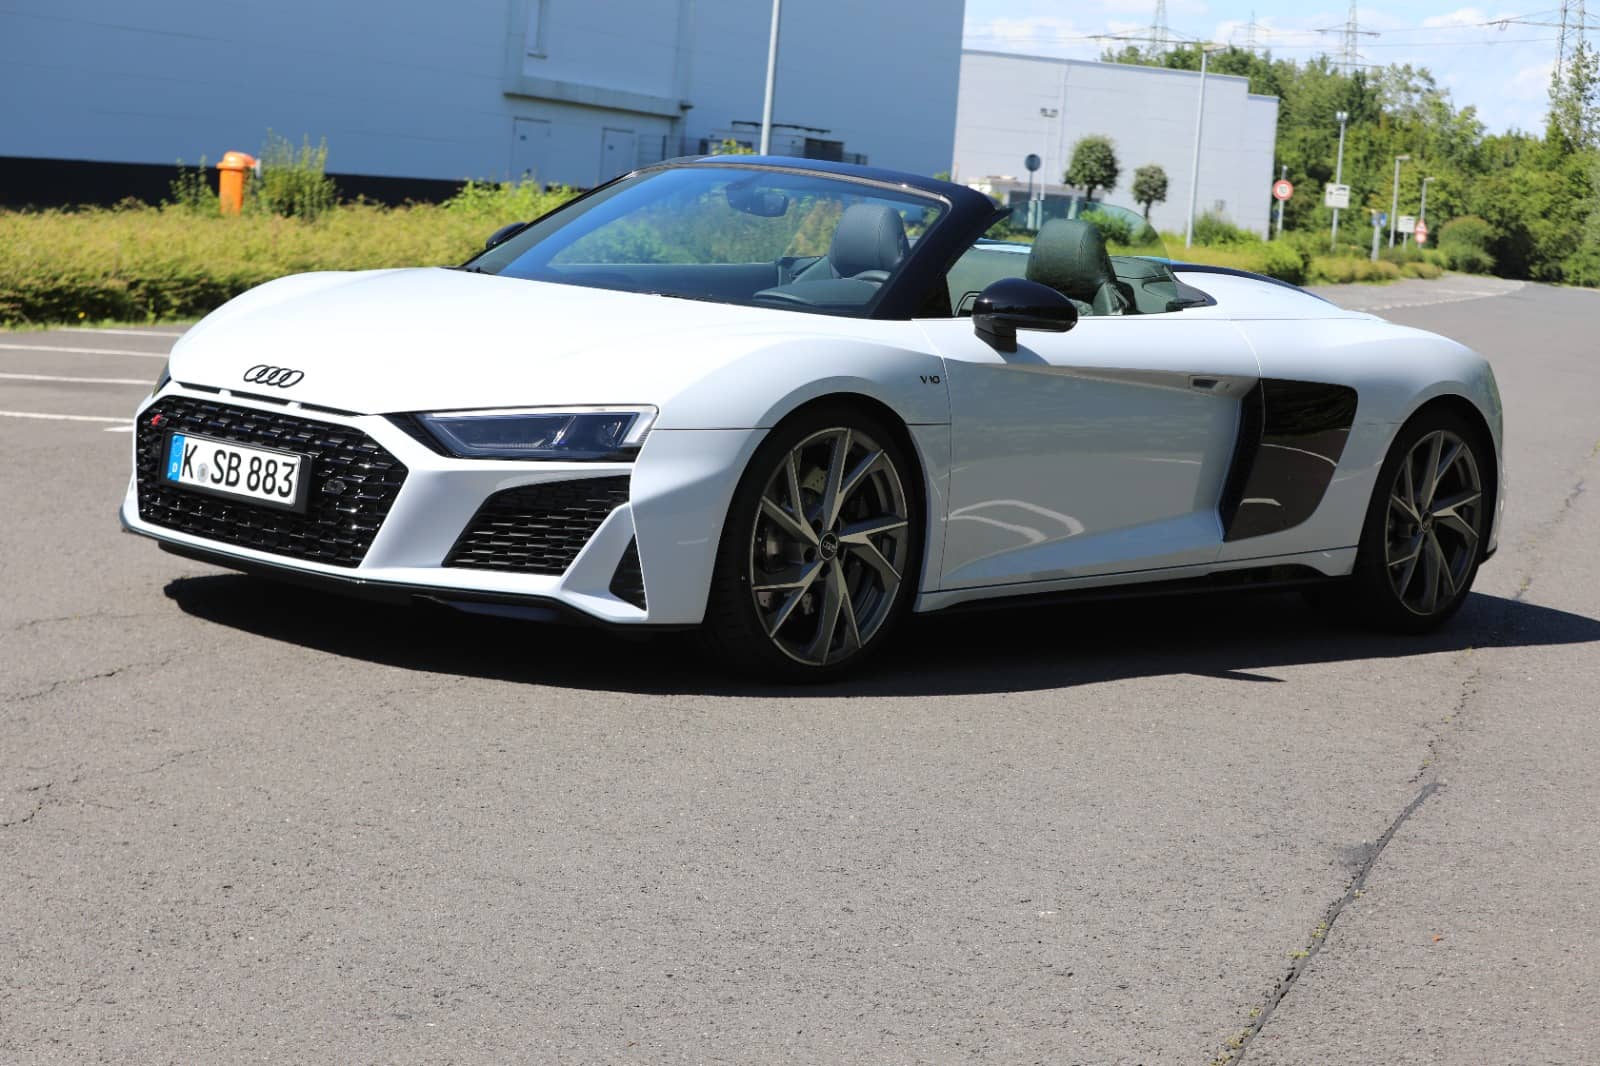 Rent an Audi R8 in Cologne